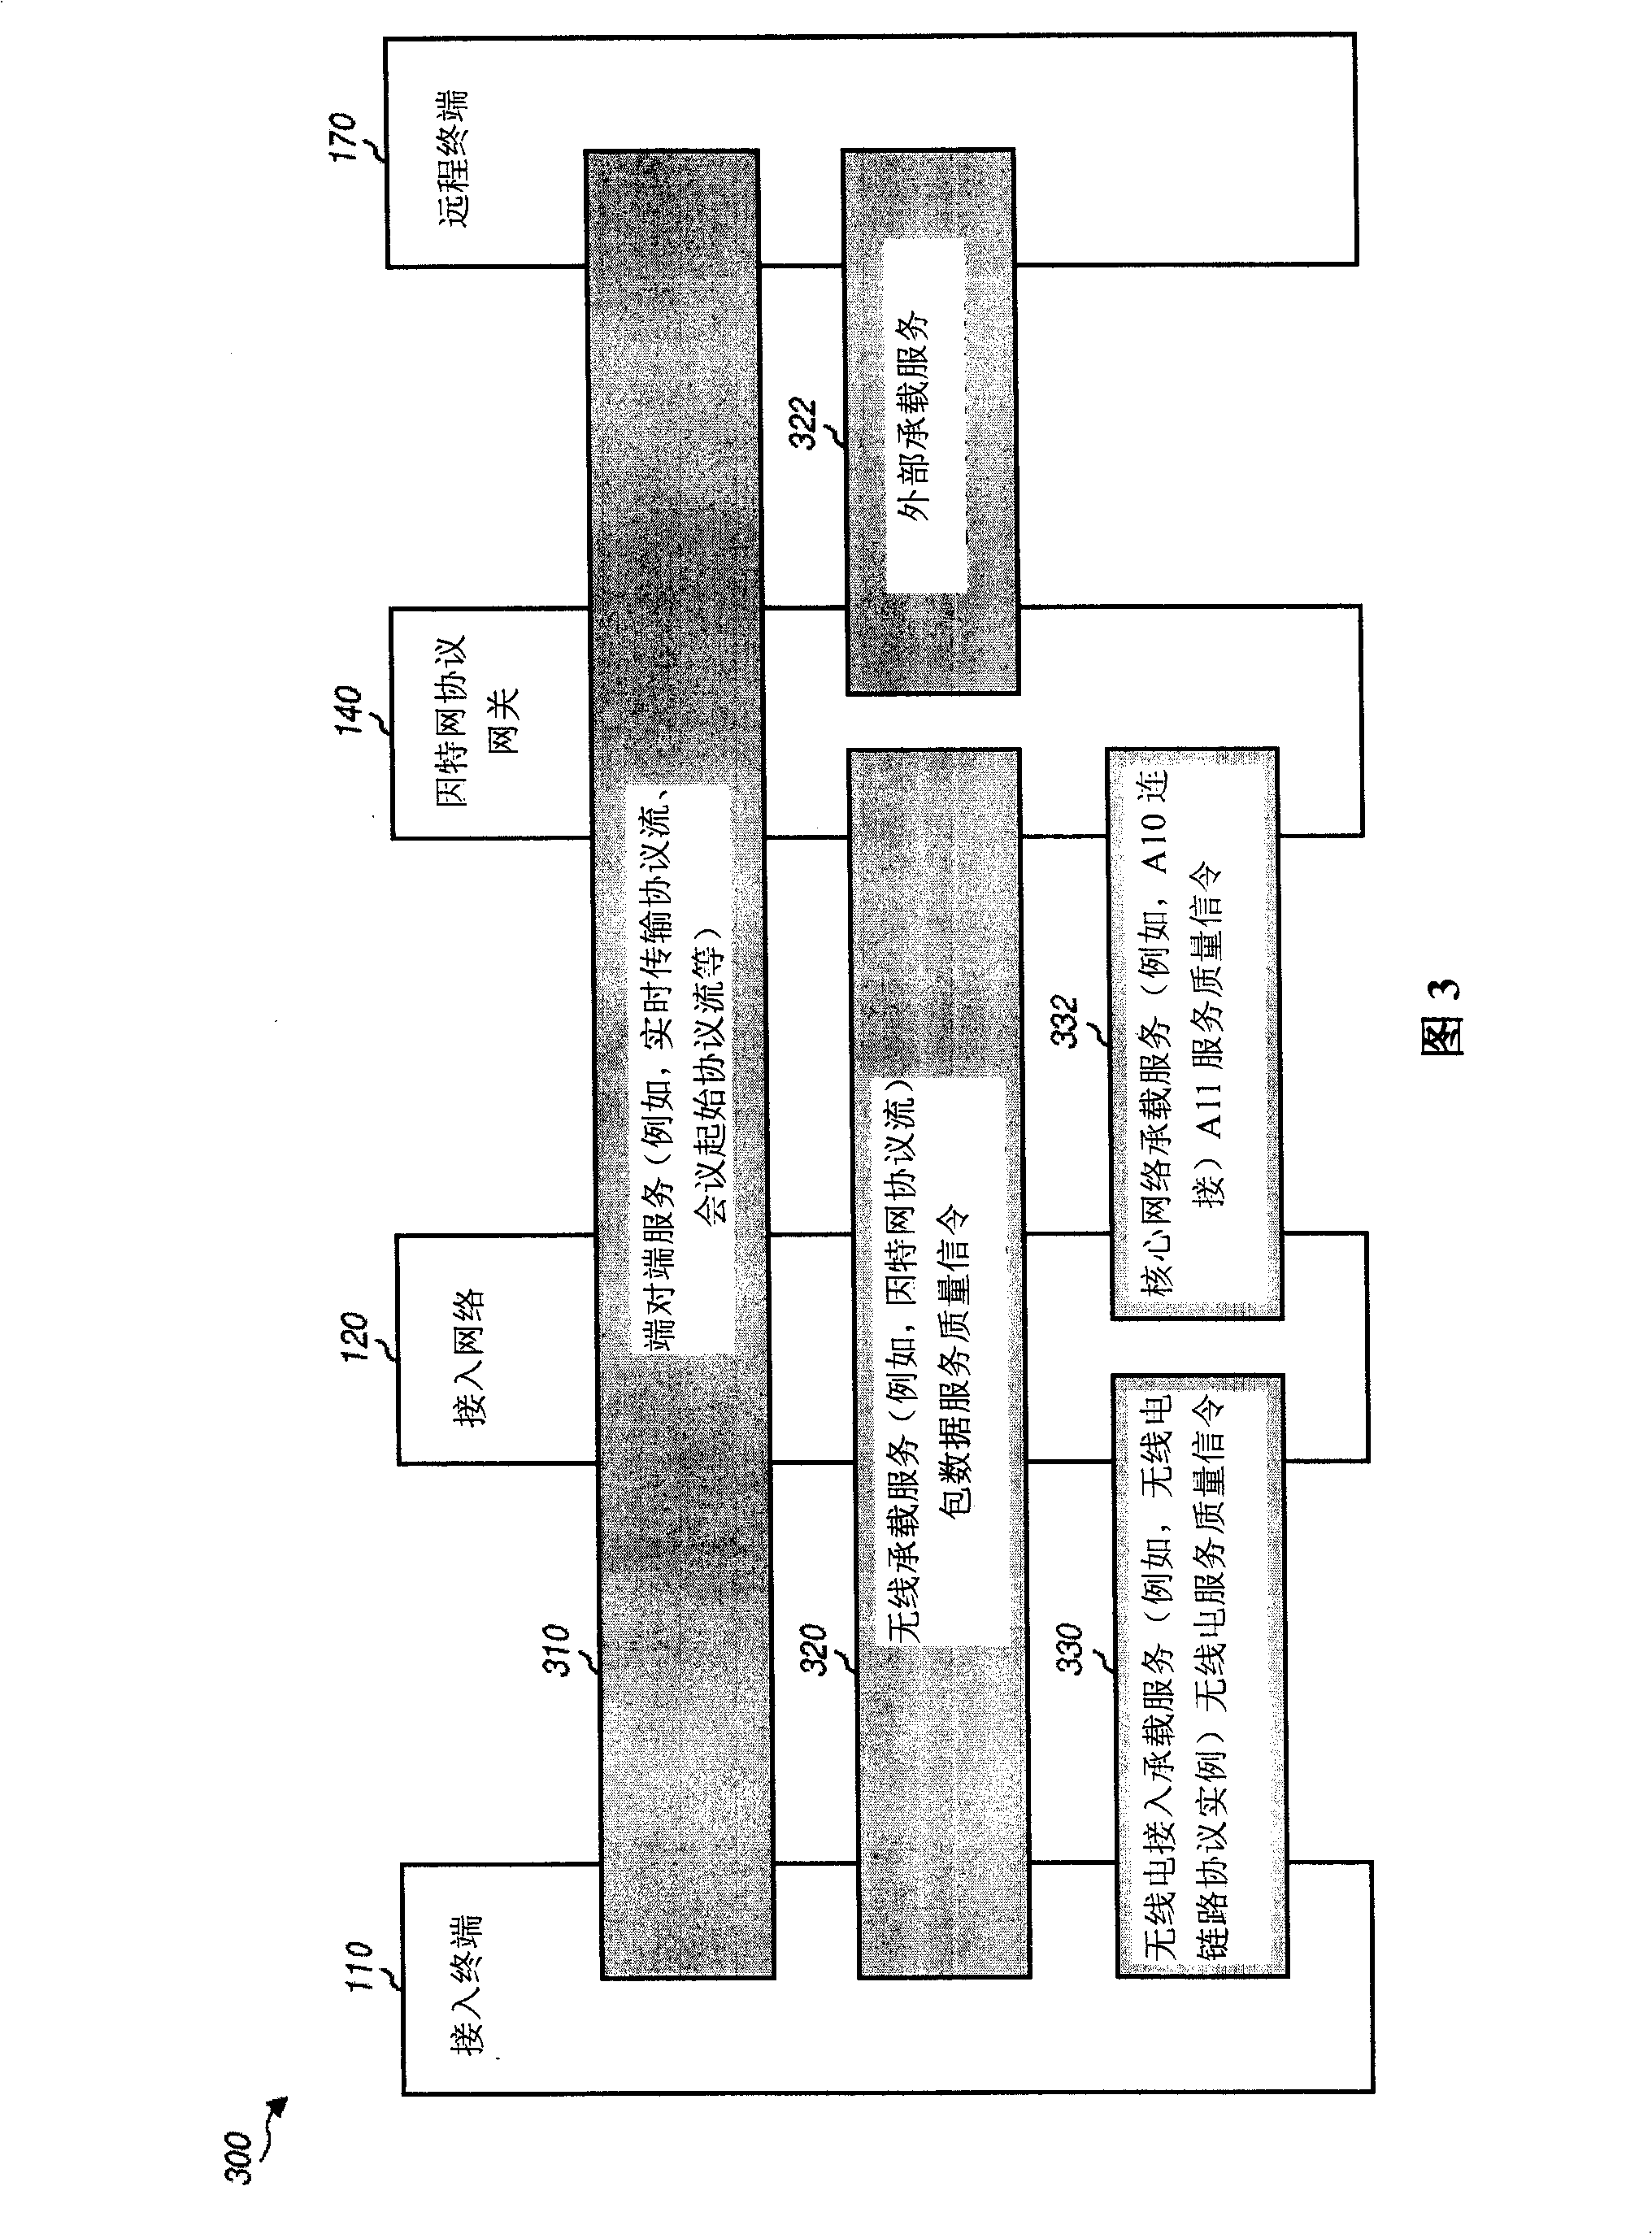 Quality of service configuration for wireless communication